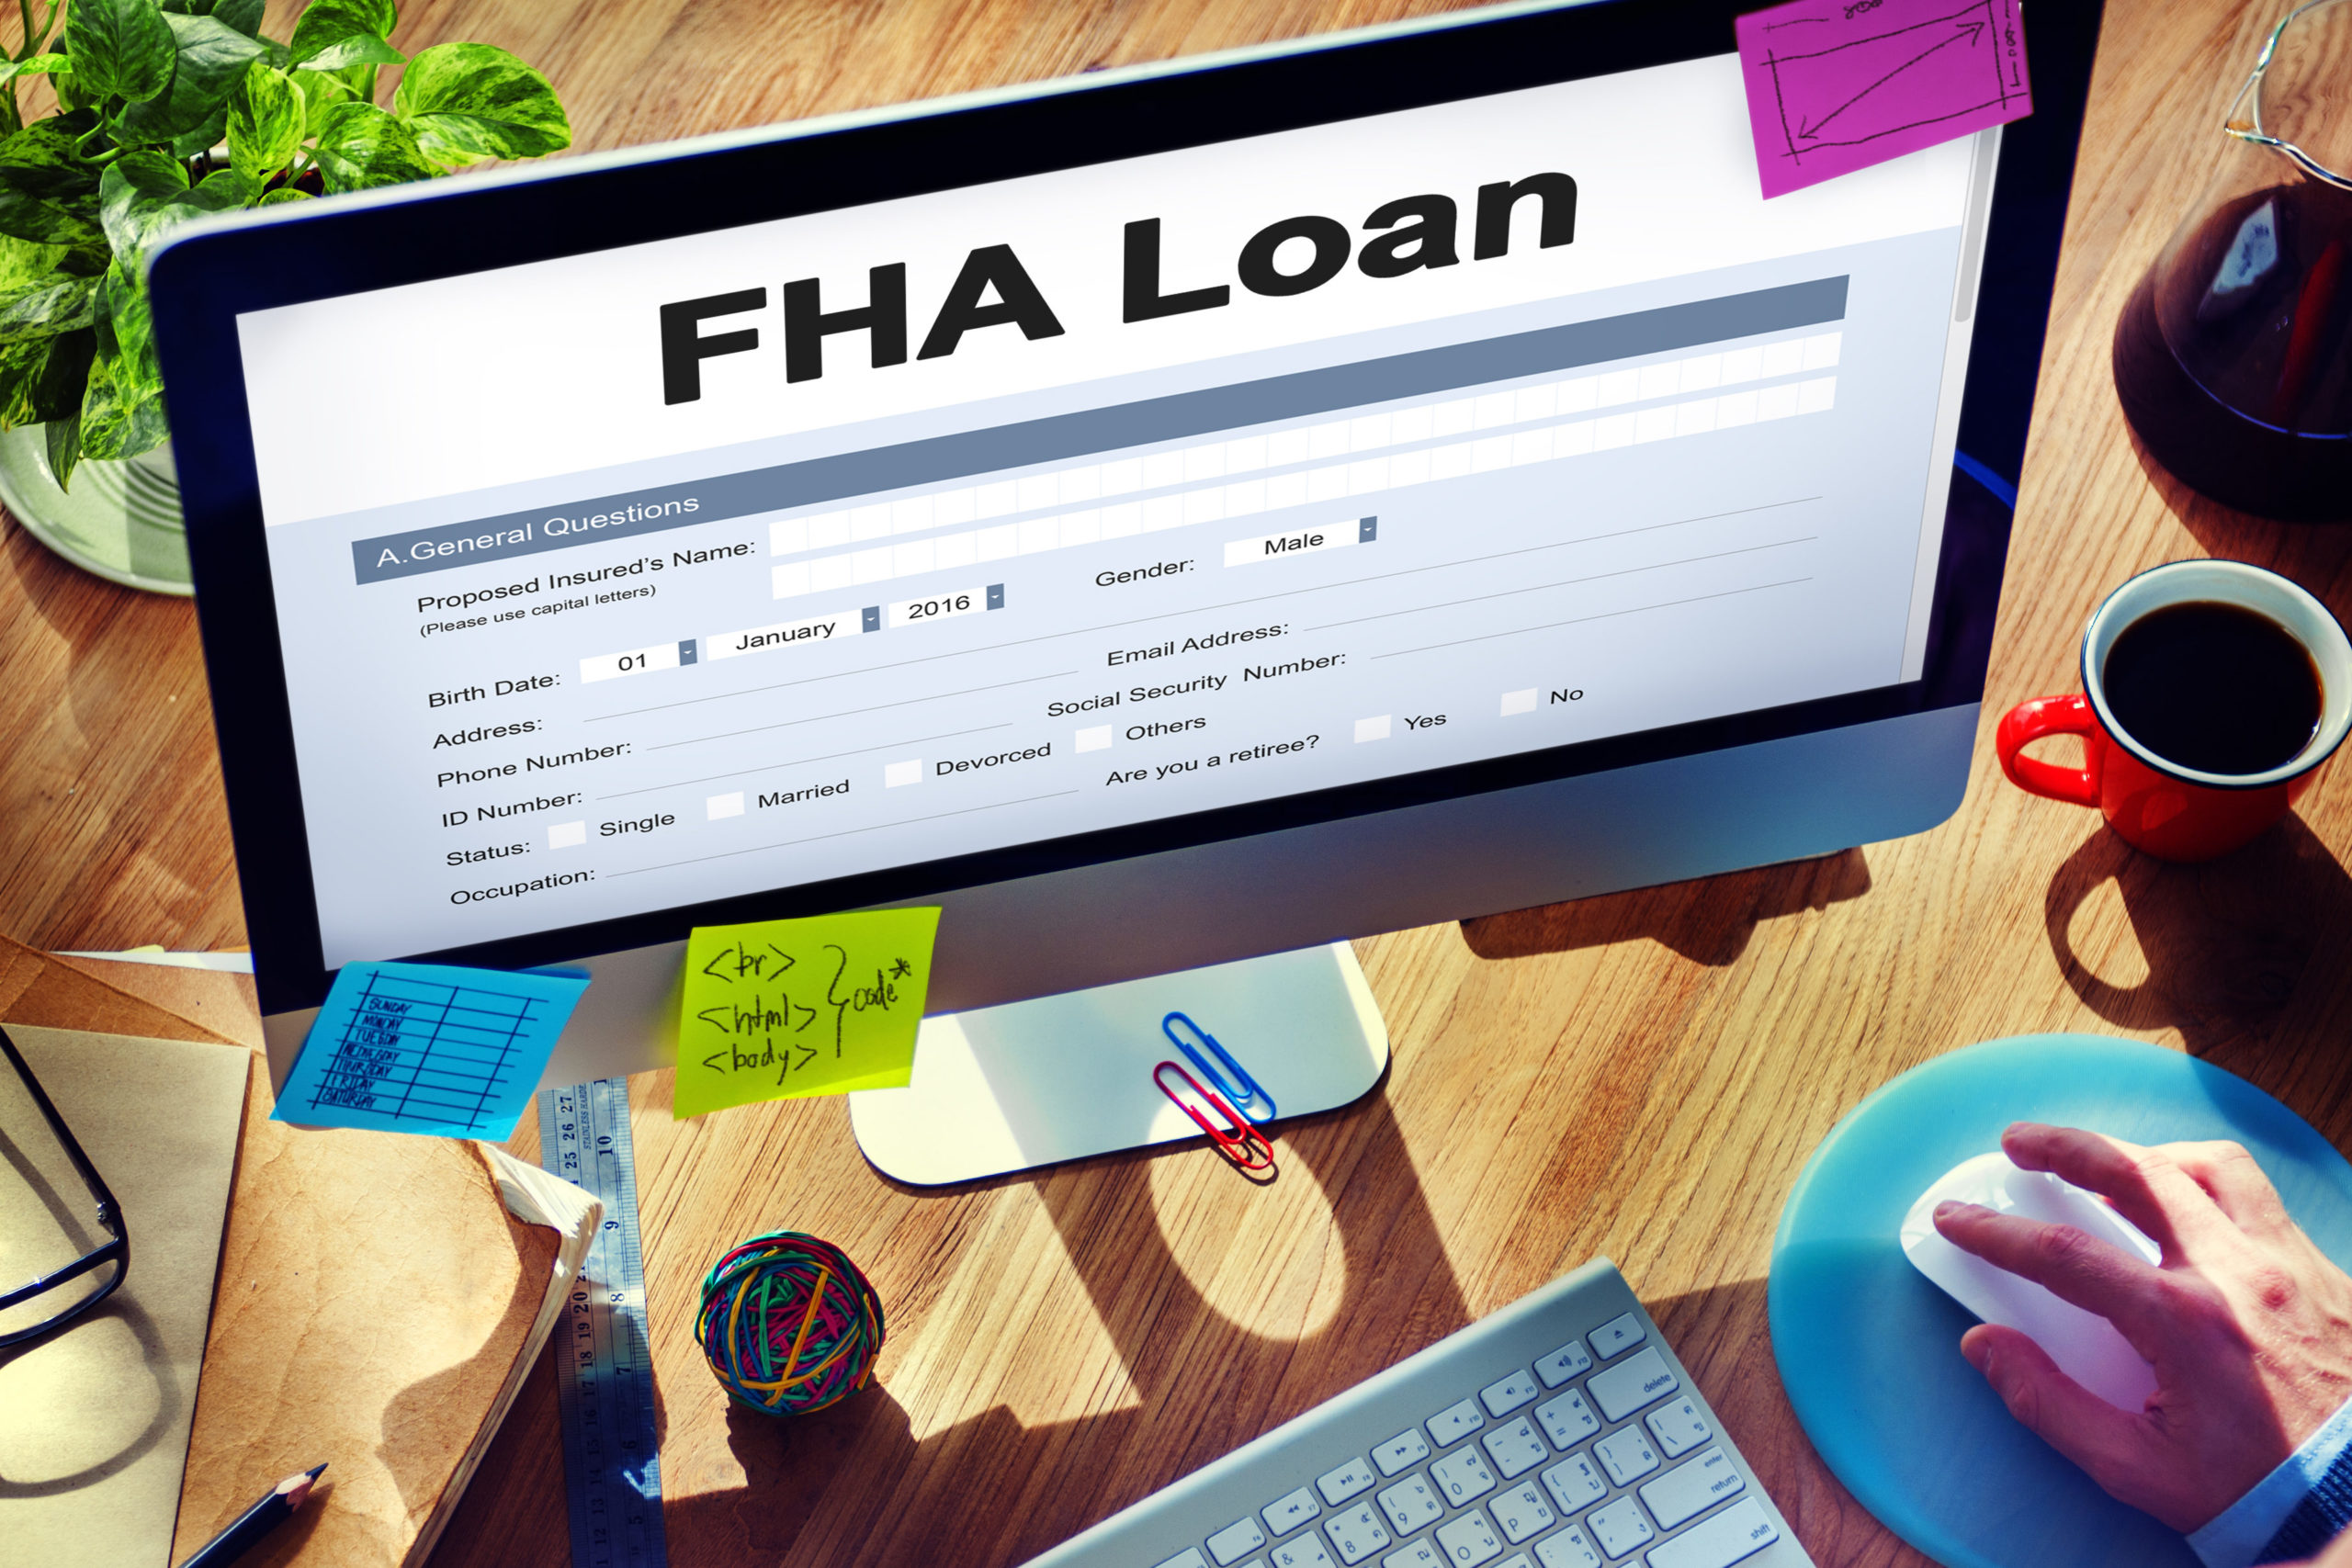 FHA loans are a great option if you're having a hard time saving for a down payment, call us today to see if this is the best option for you! (614) 451-6616